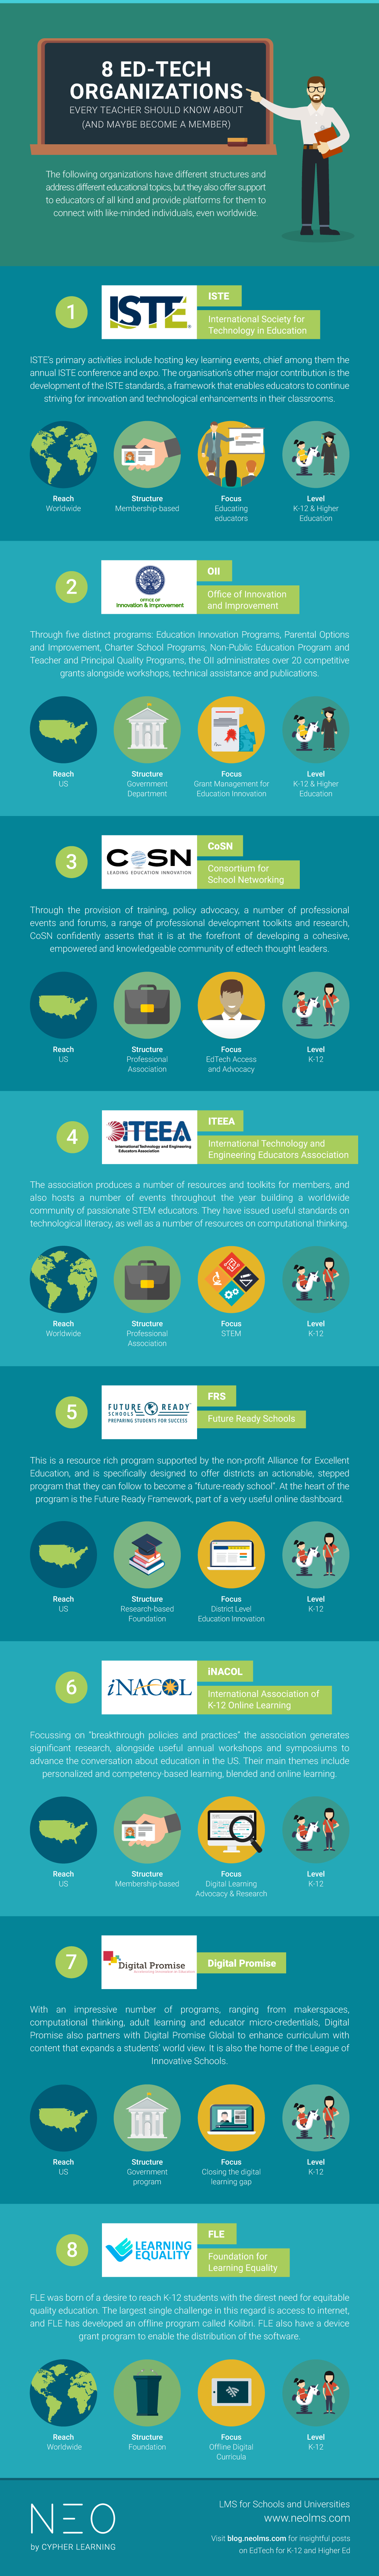 8 Ed-tech organizations every teacher should know about INFOGRAPHIC